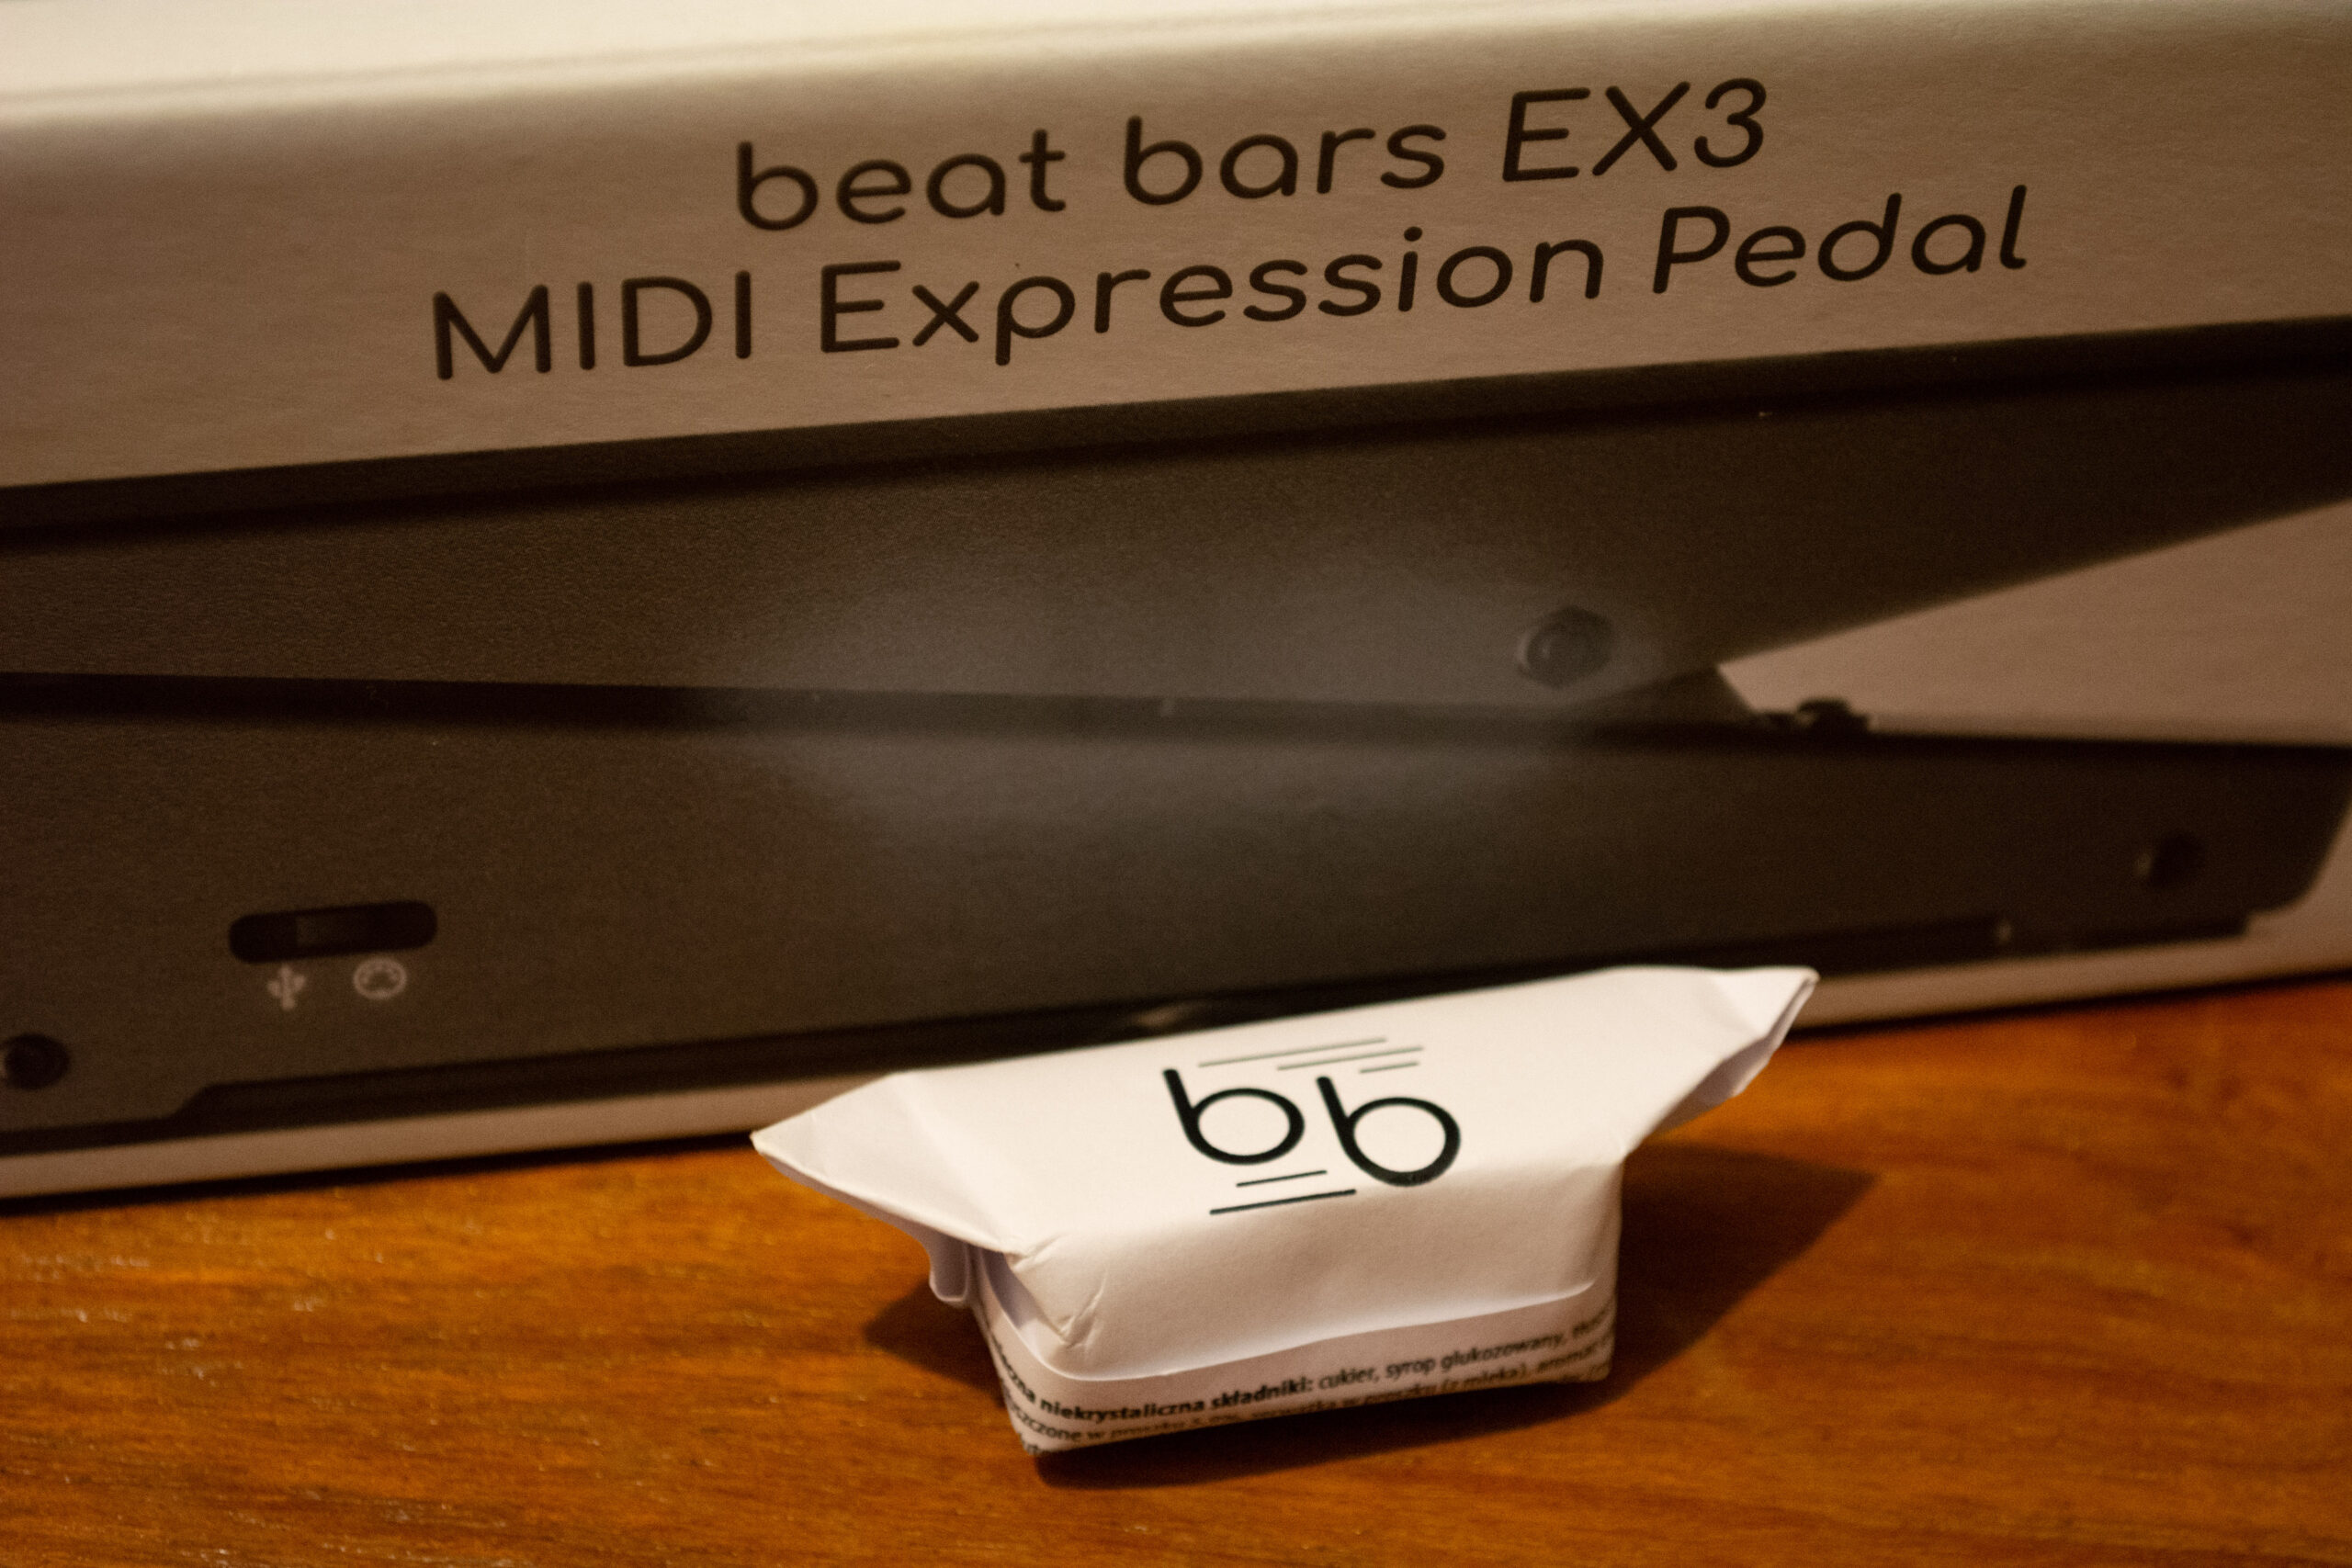 Beat Bars EX3 MIDI Expression Pedal packaging and candy